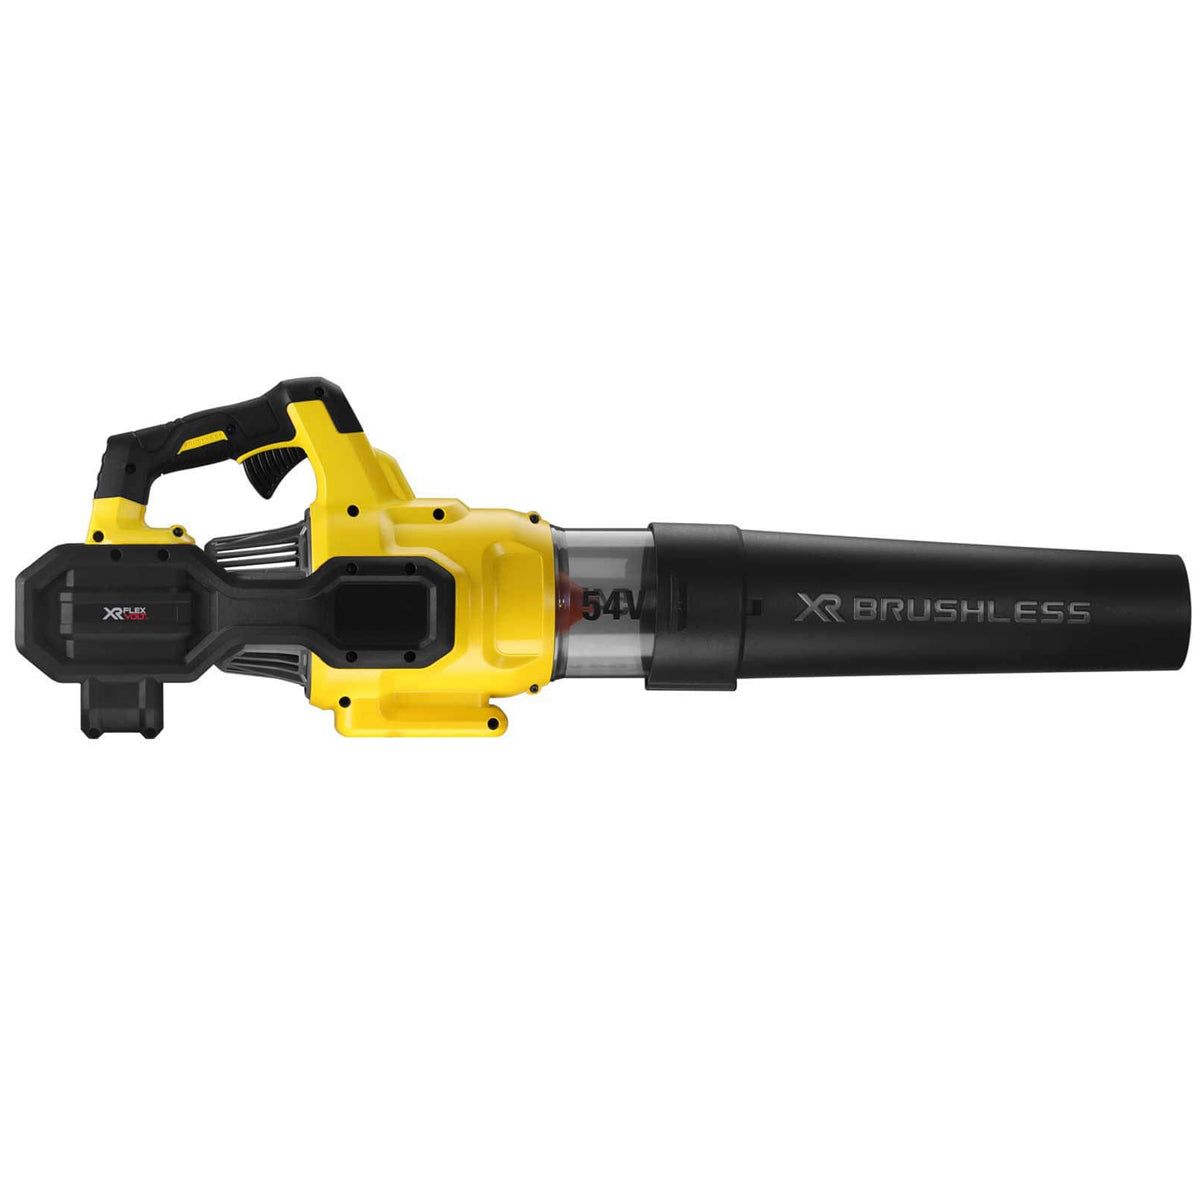 Dewalt DCMBA572X1 54V Flexvolt Brushless Axial Blower with 1 x 9.0Ah Battery & Charger